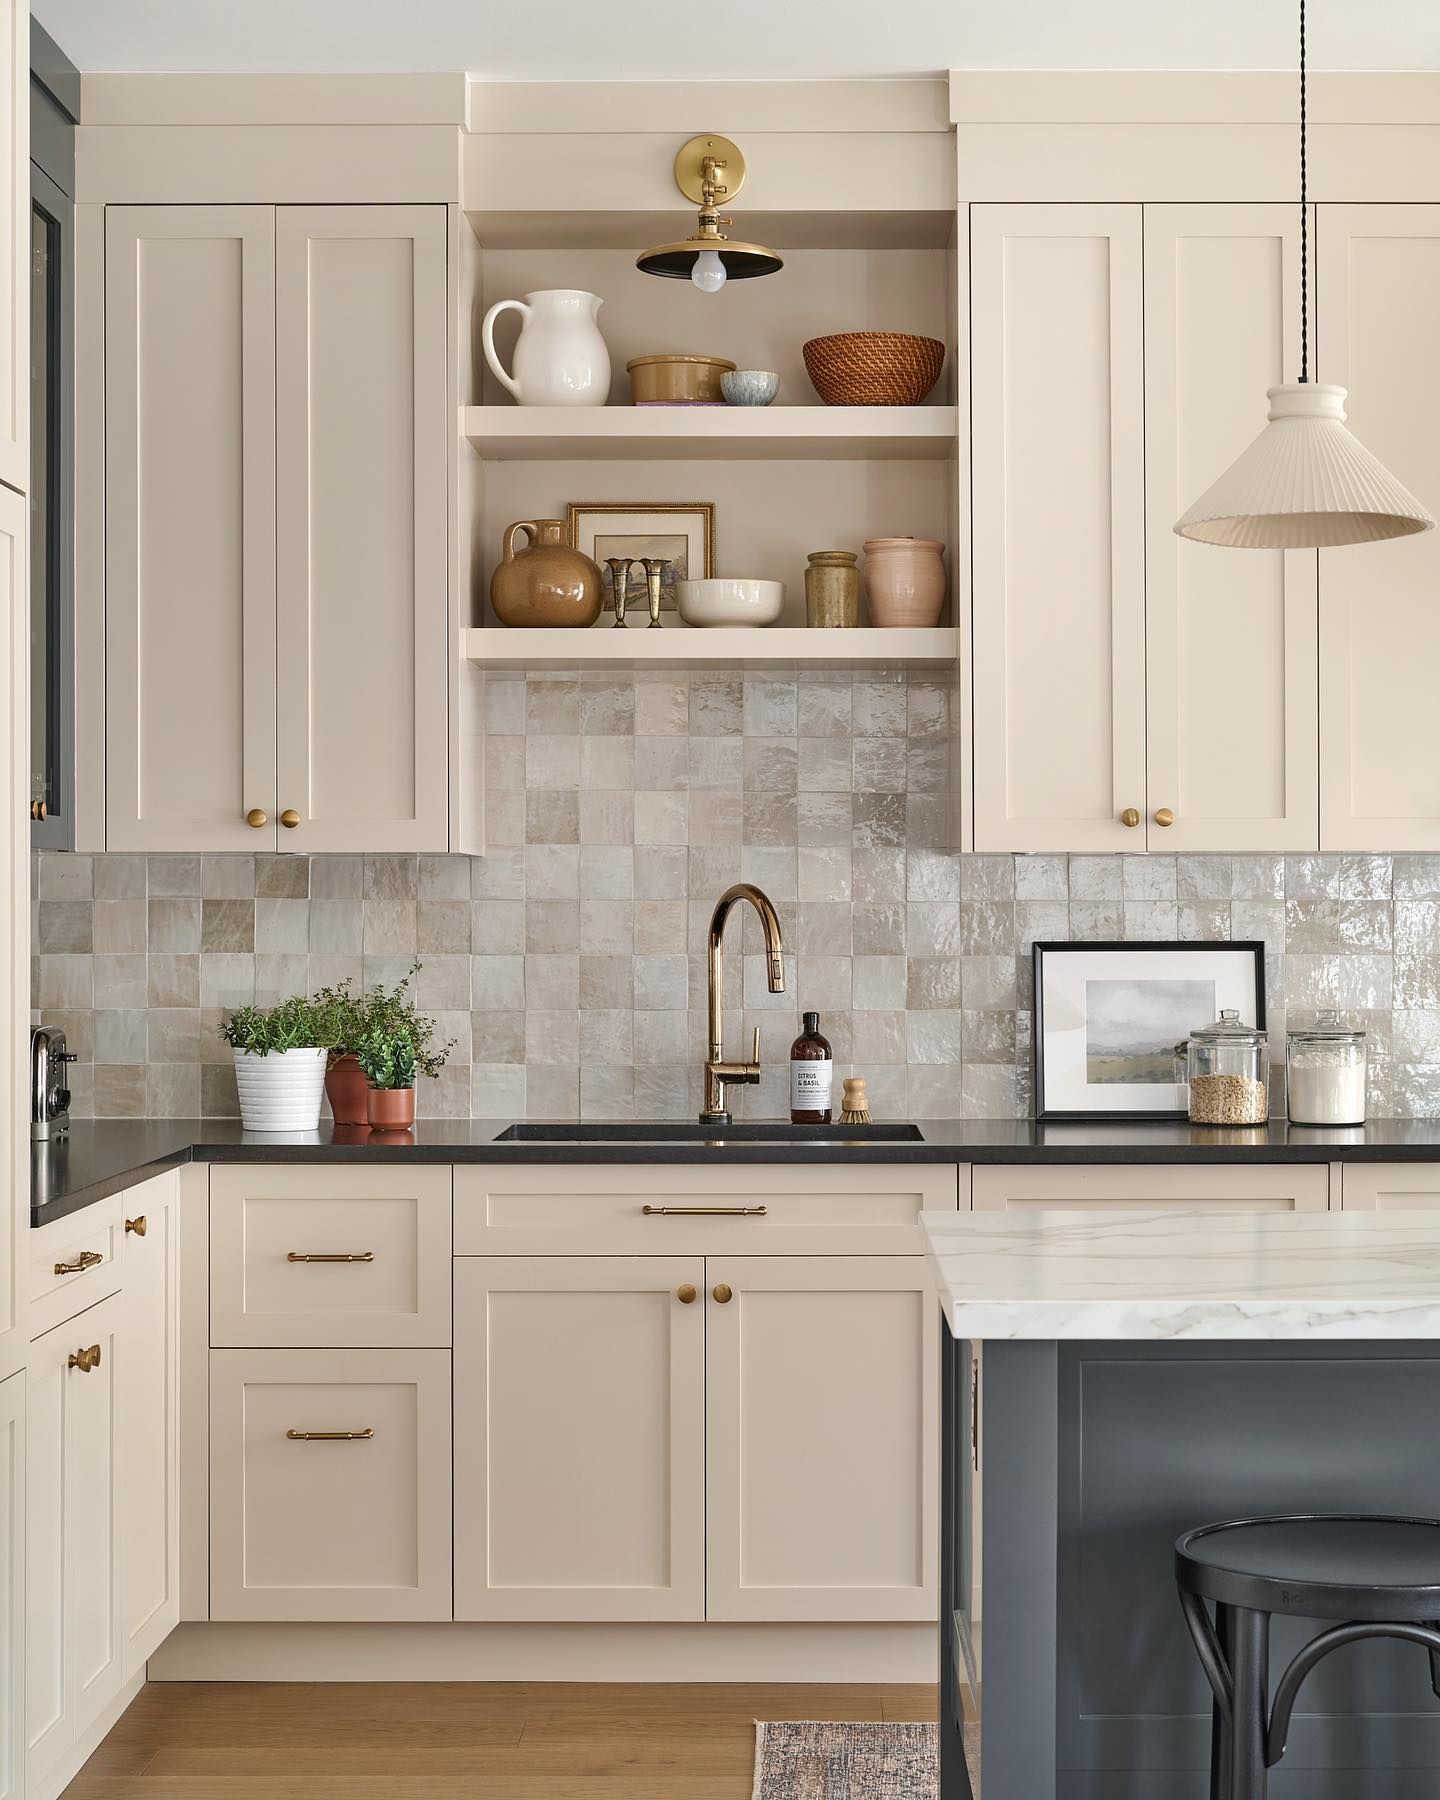 The Perfect Match: White Kitchen Cabinets and Countertops